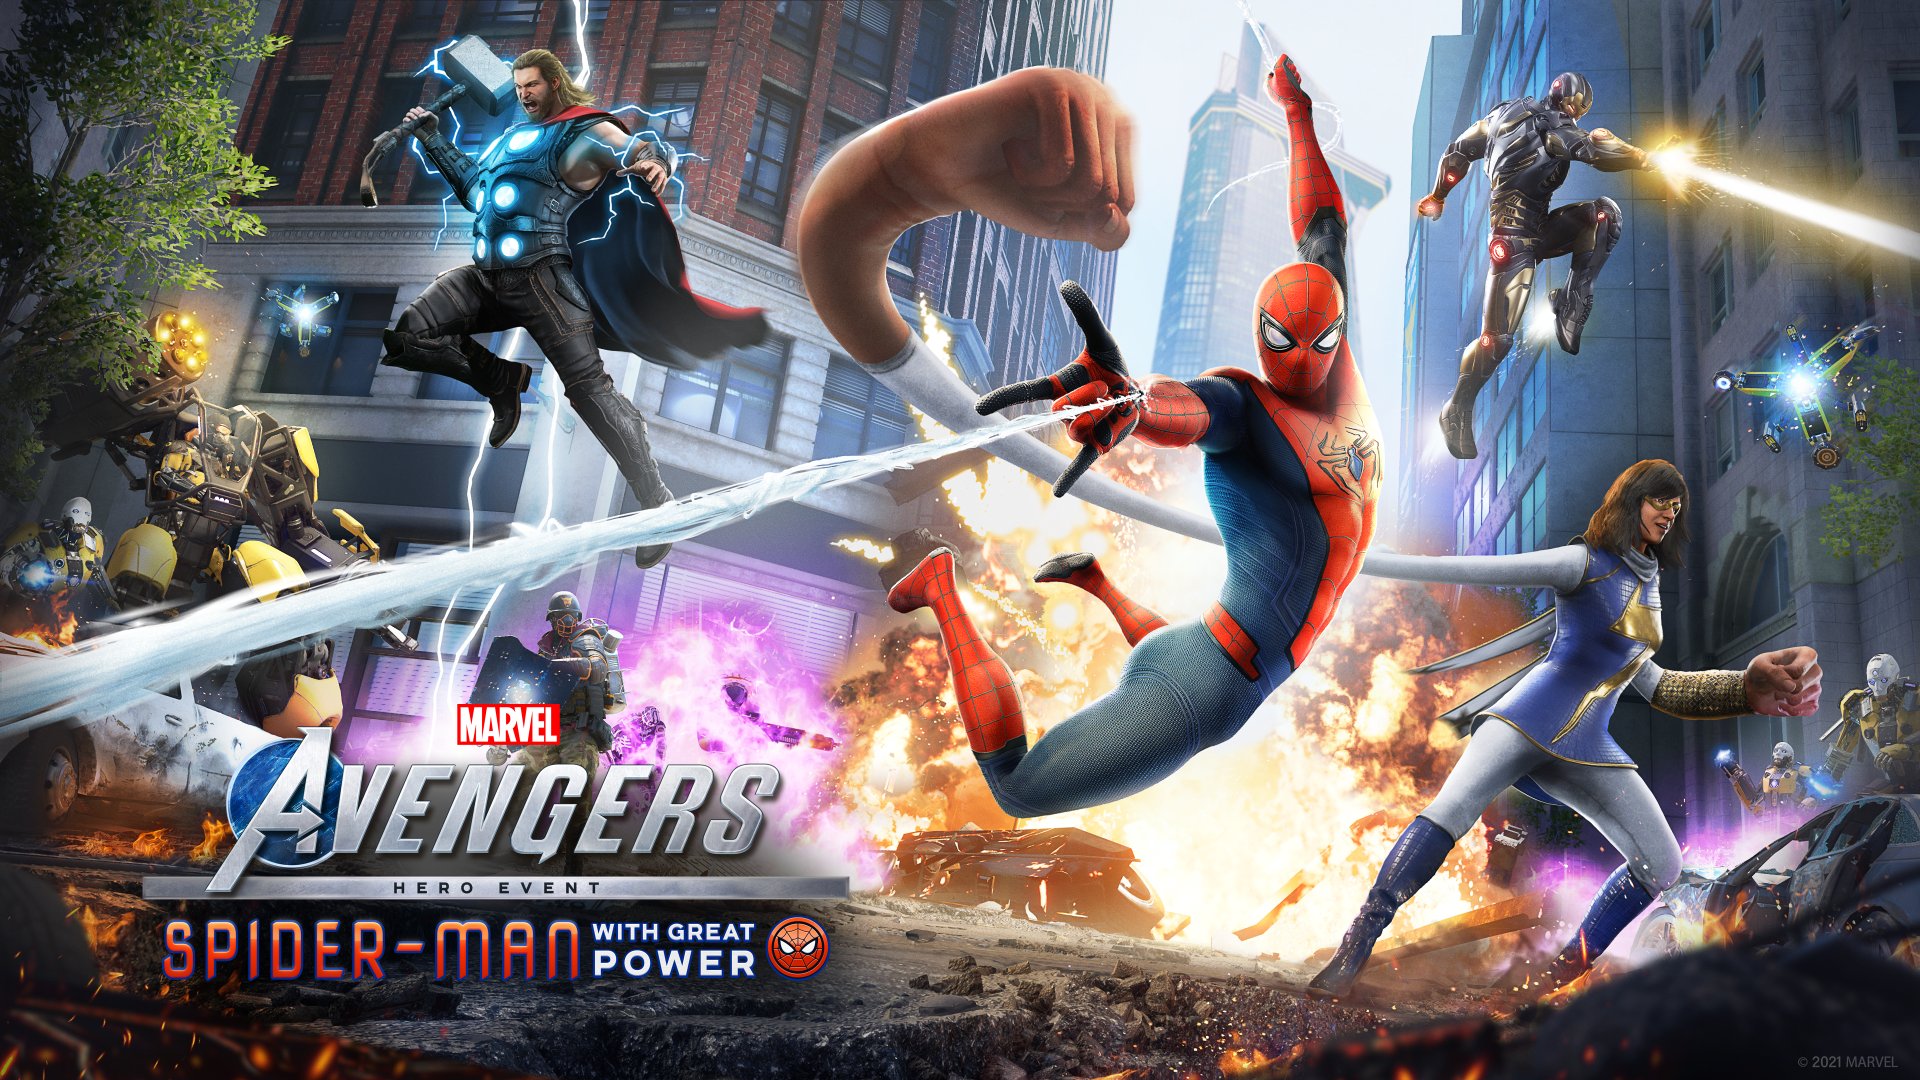 Marvel's Avengers: First Look at Spider-Man